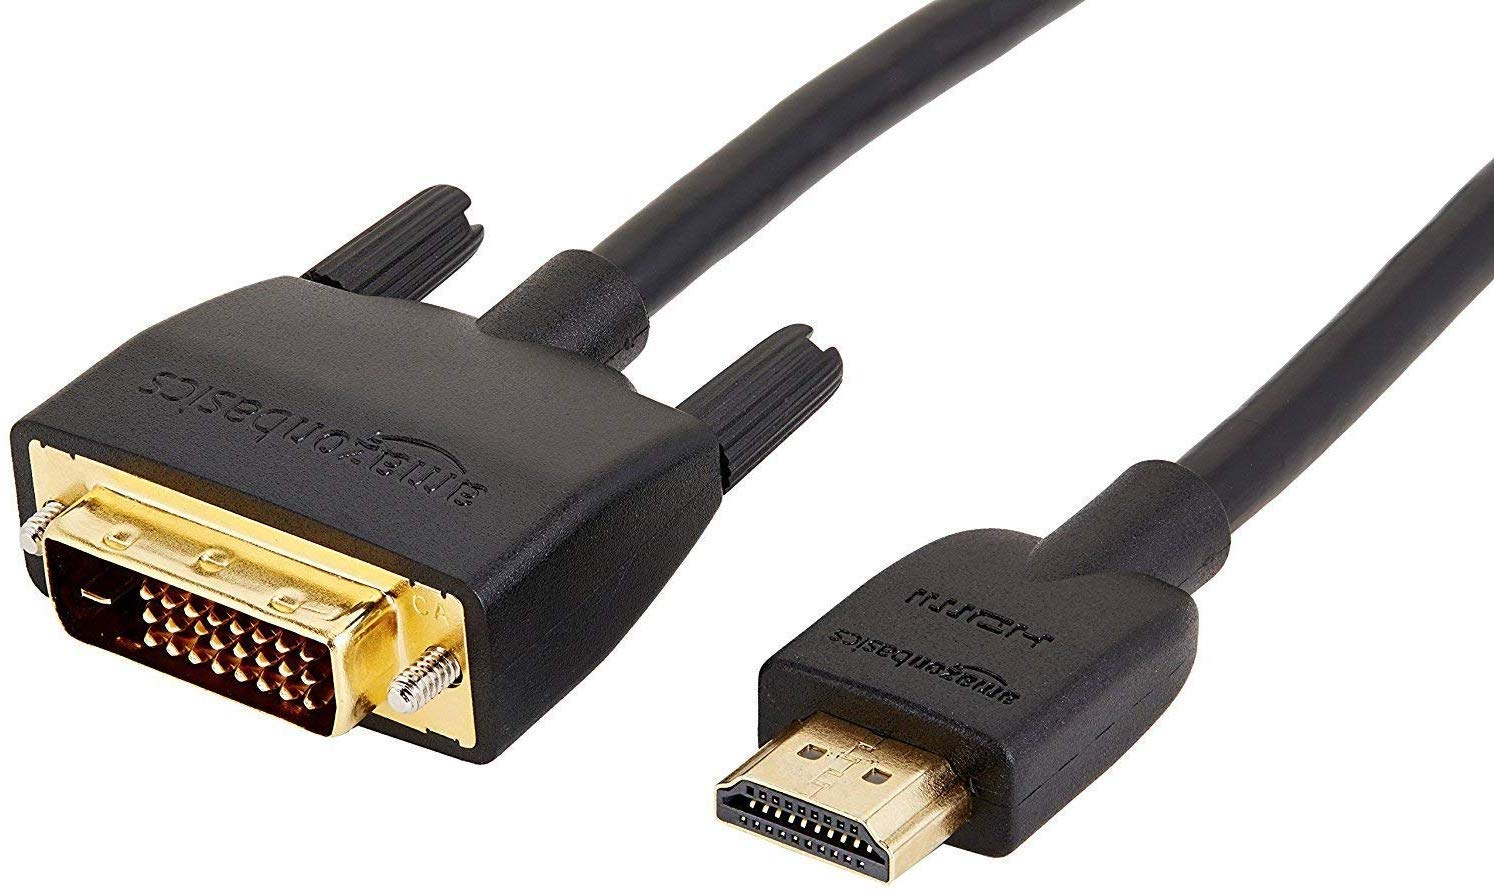 Amazon Basics HDMI to DVI Adapter Cable, Bi-Directional 1080p, Gold Plated, Black, 6 Feet, 1-Pack